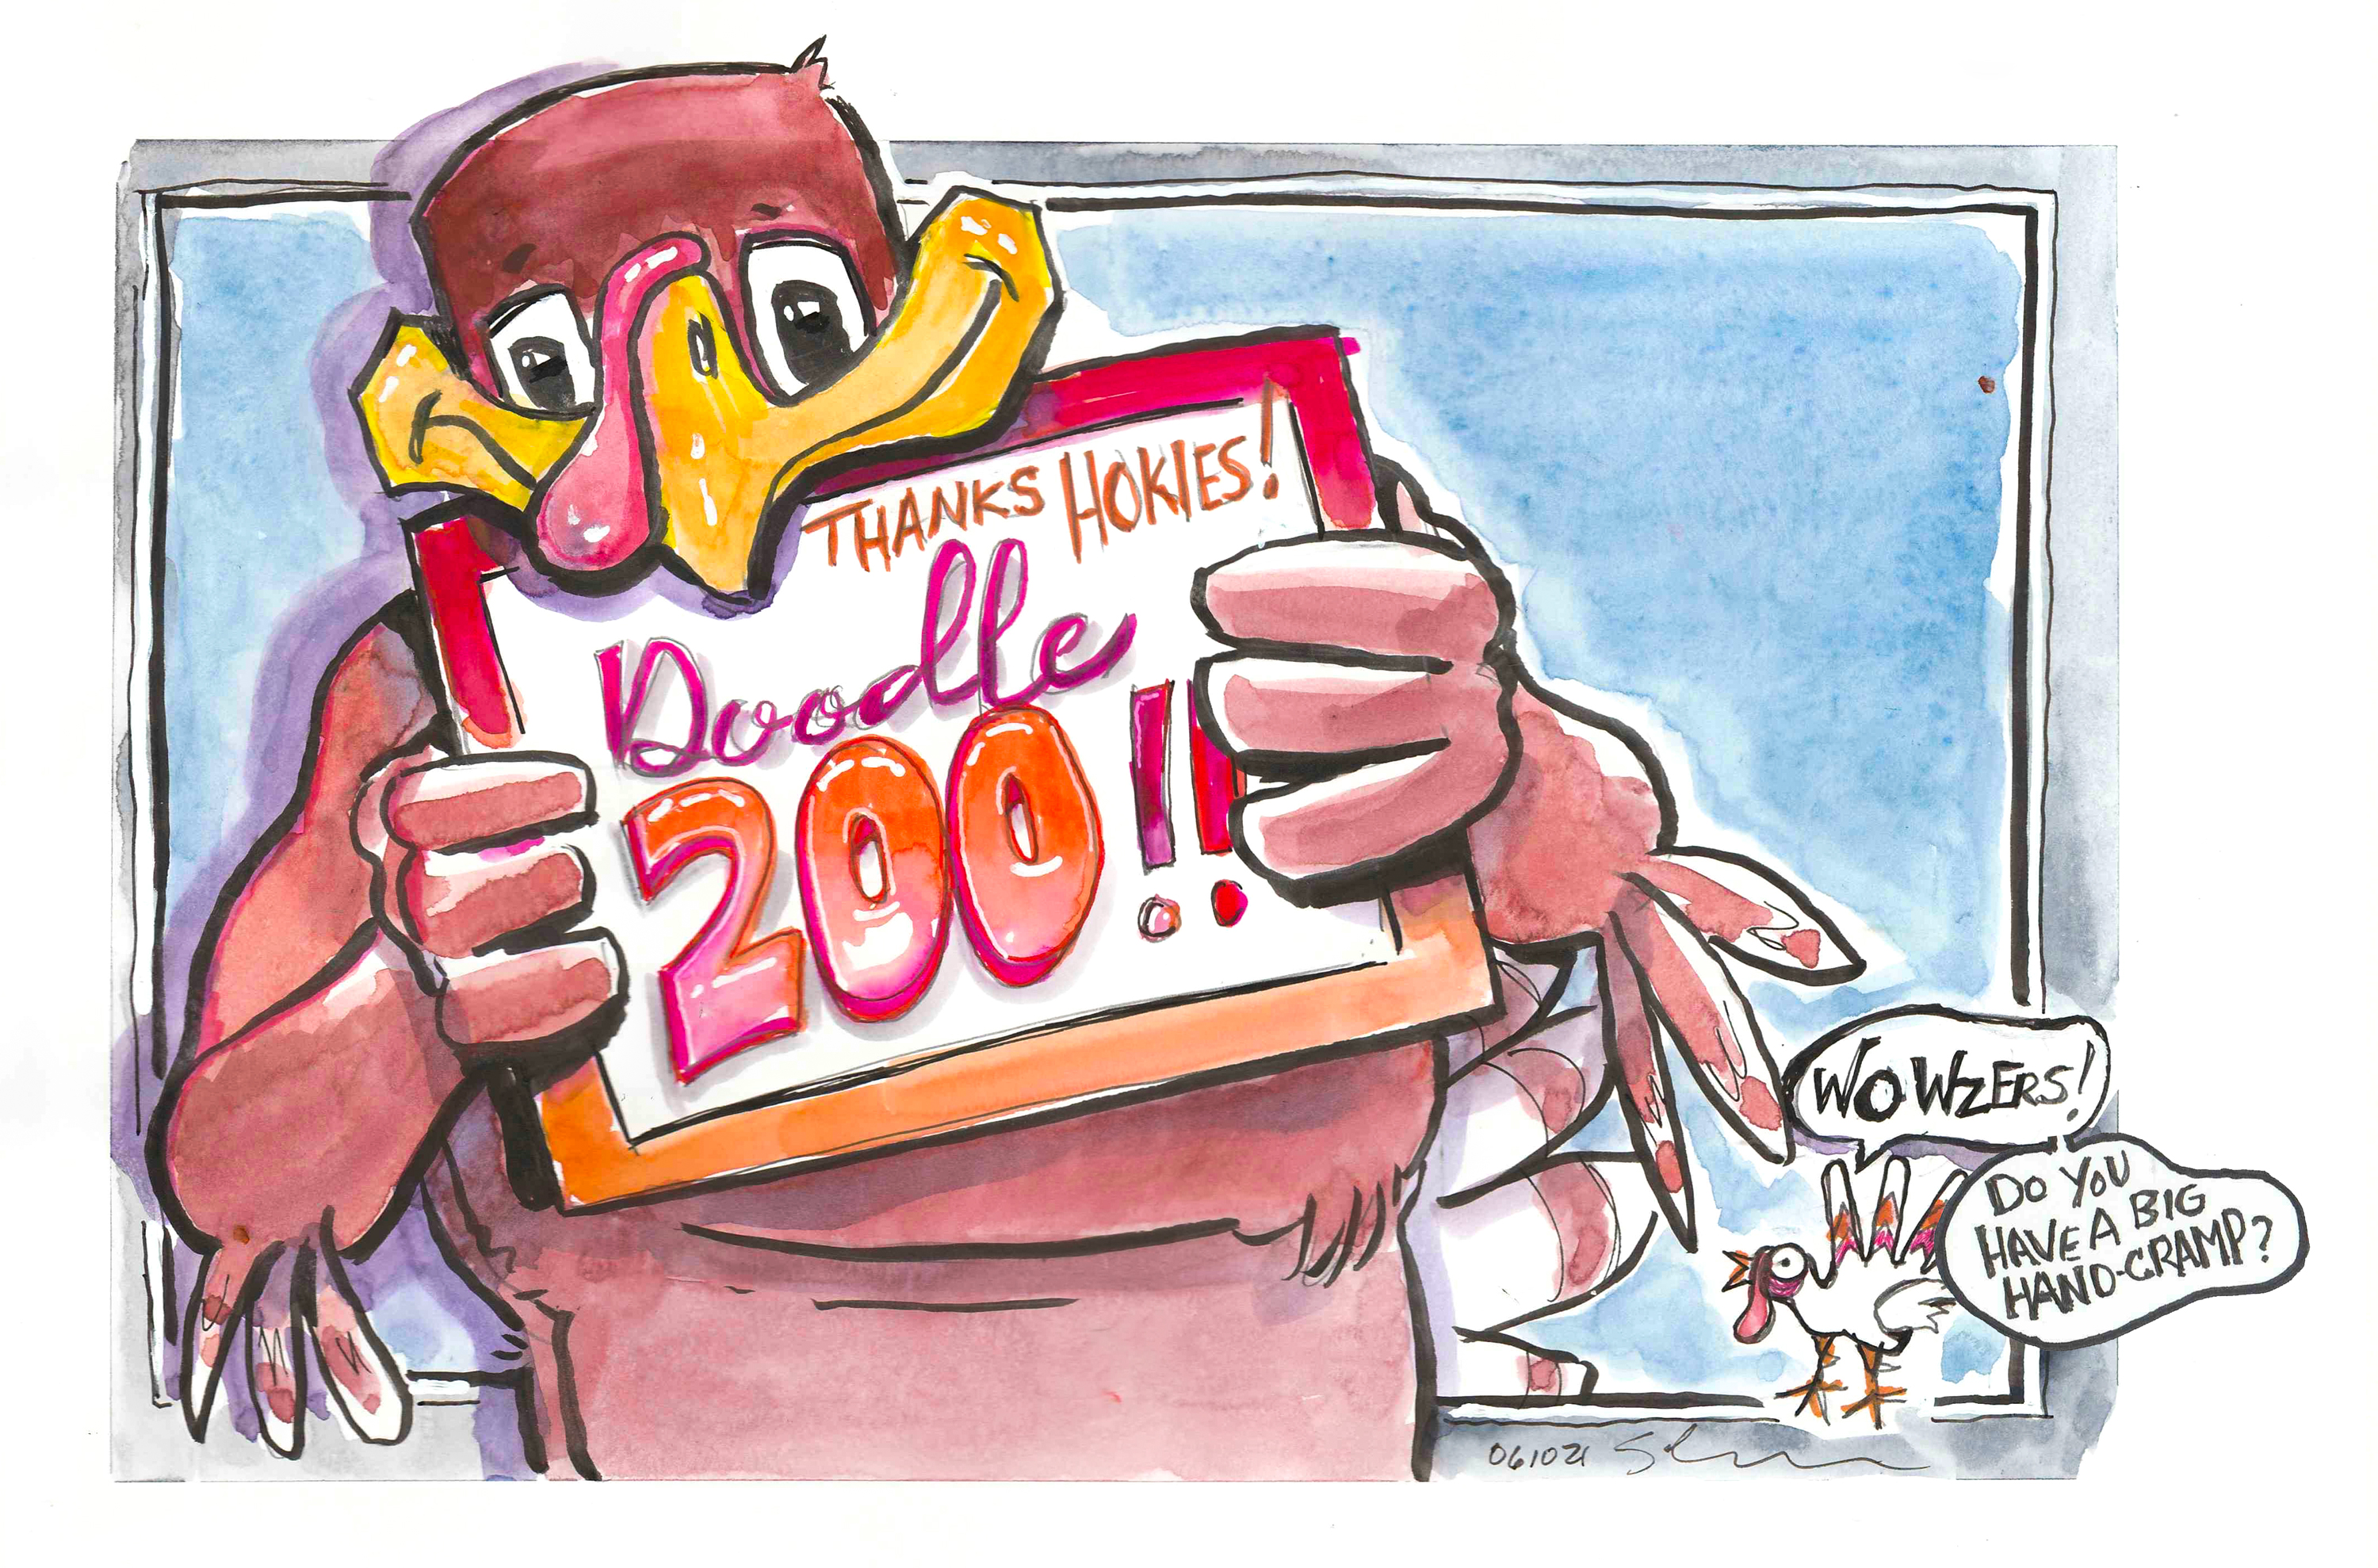 Illustration in ink and watercolor of the HokieBird holding a sign that says 'Thanks Hokies! Doodle 200!!'